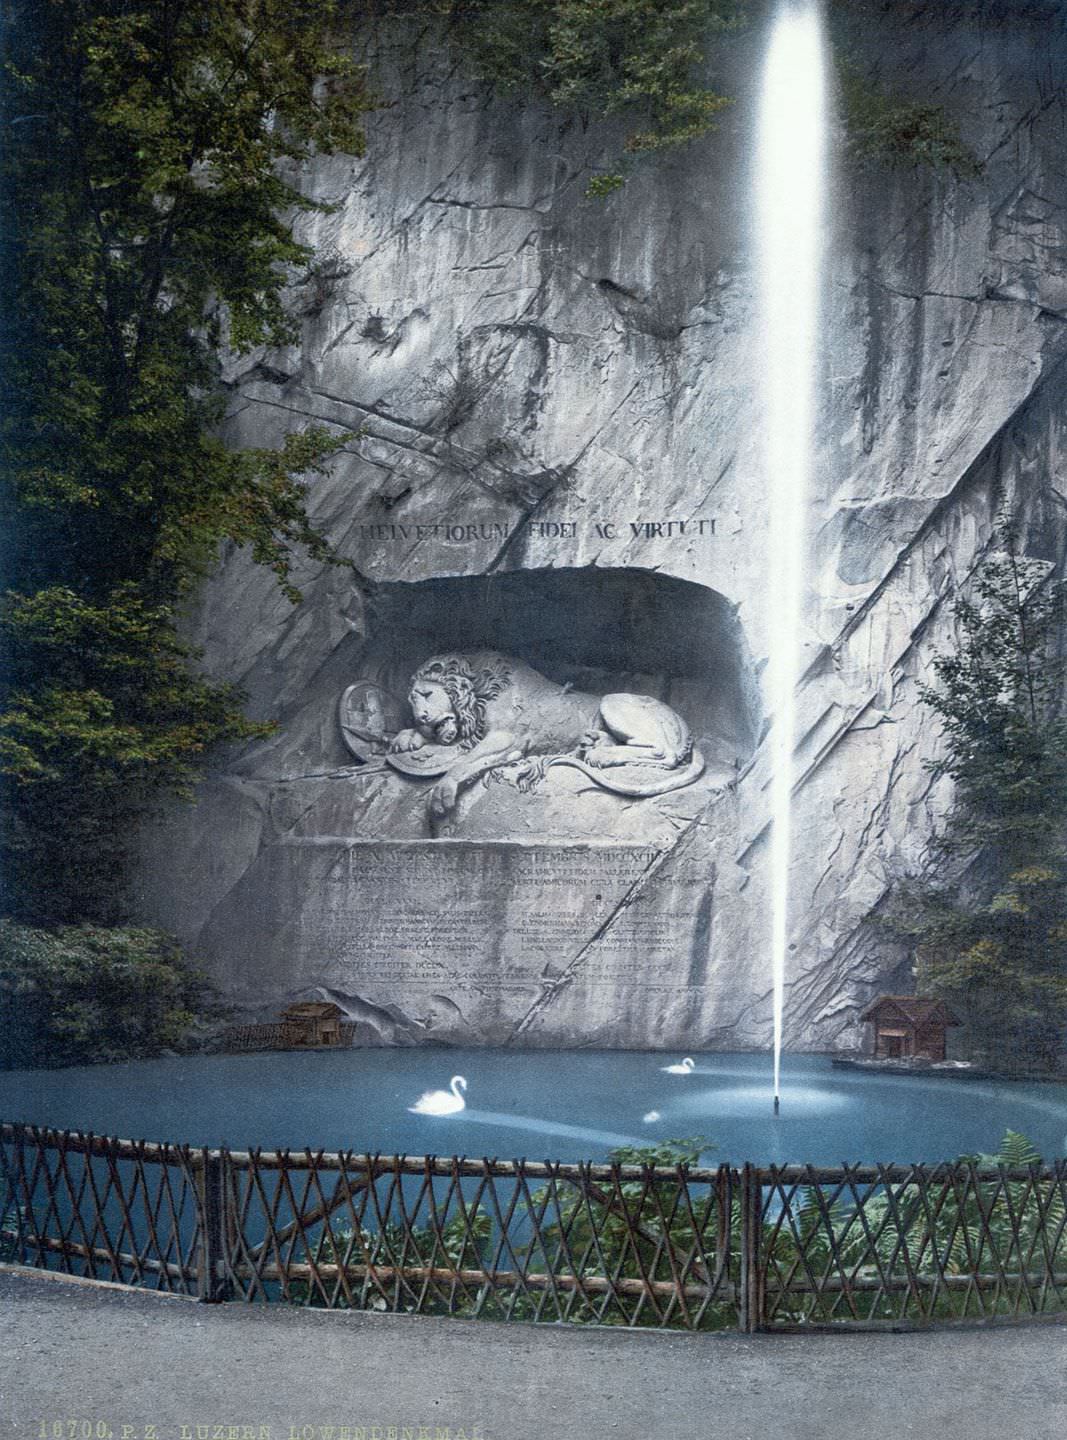 The Lion Monument in Lucerne, carved in 1820-21 to commemorate Swiss Guards killed in 1792 during the French Revolution.